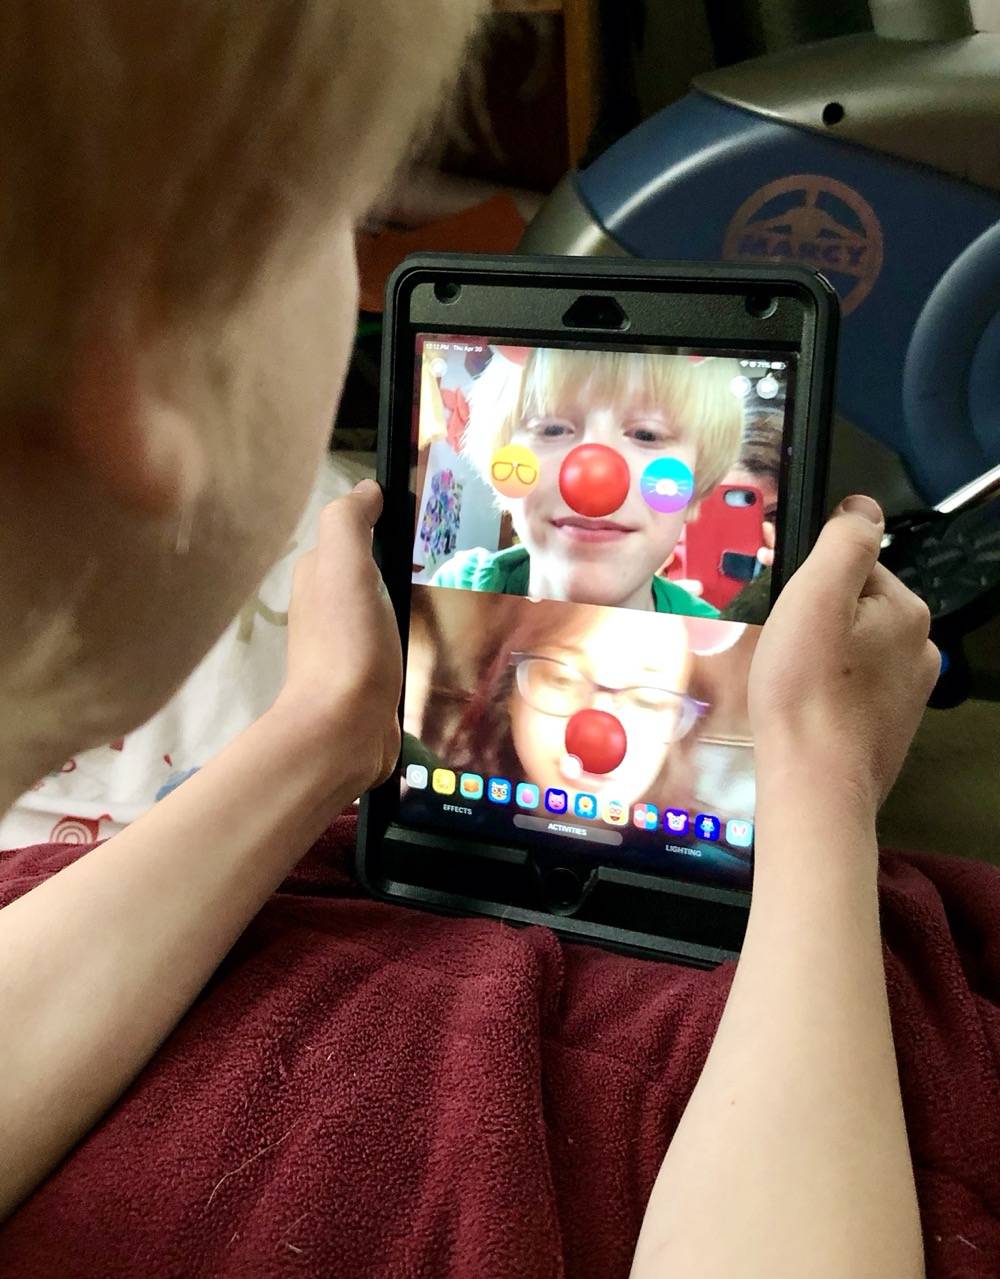 A child holds a tablet and is video chatting with a woman. On the tablet screen, both faces are covered in clown facial markings, including big, red noses. Photo by Danielle Chynoweth. 